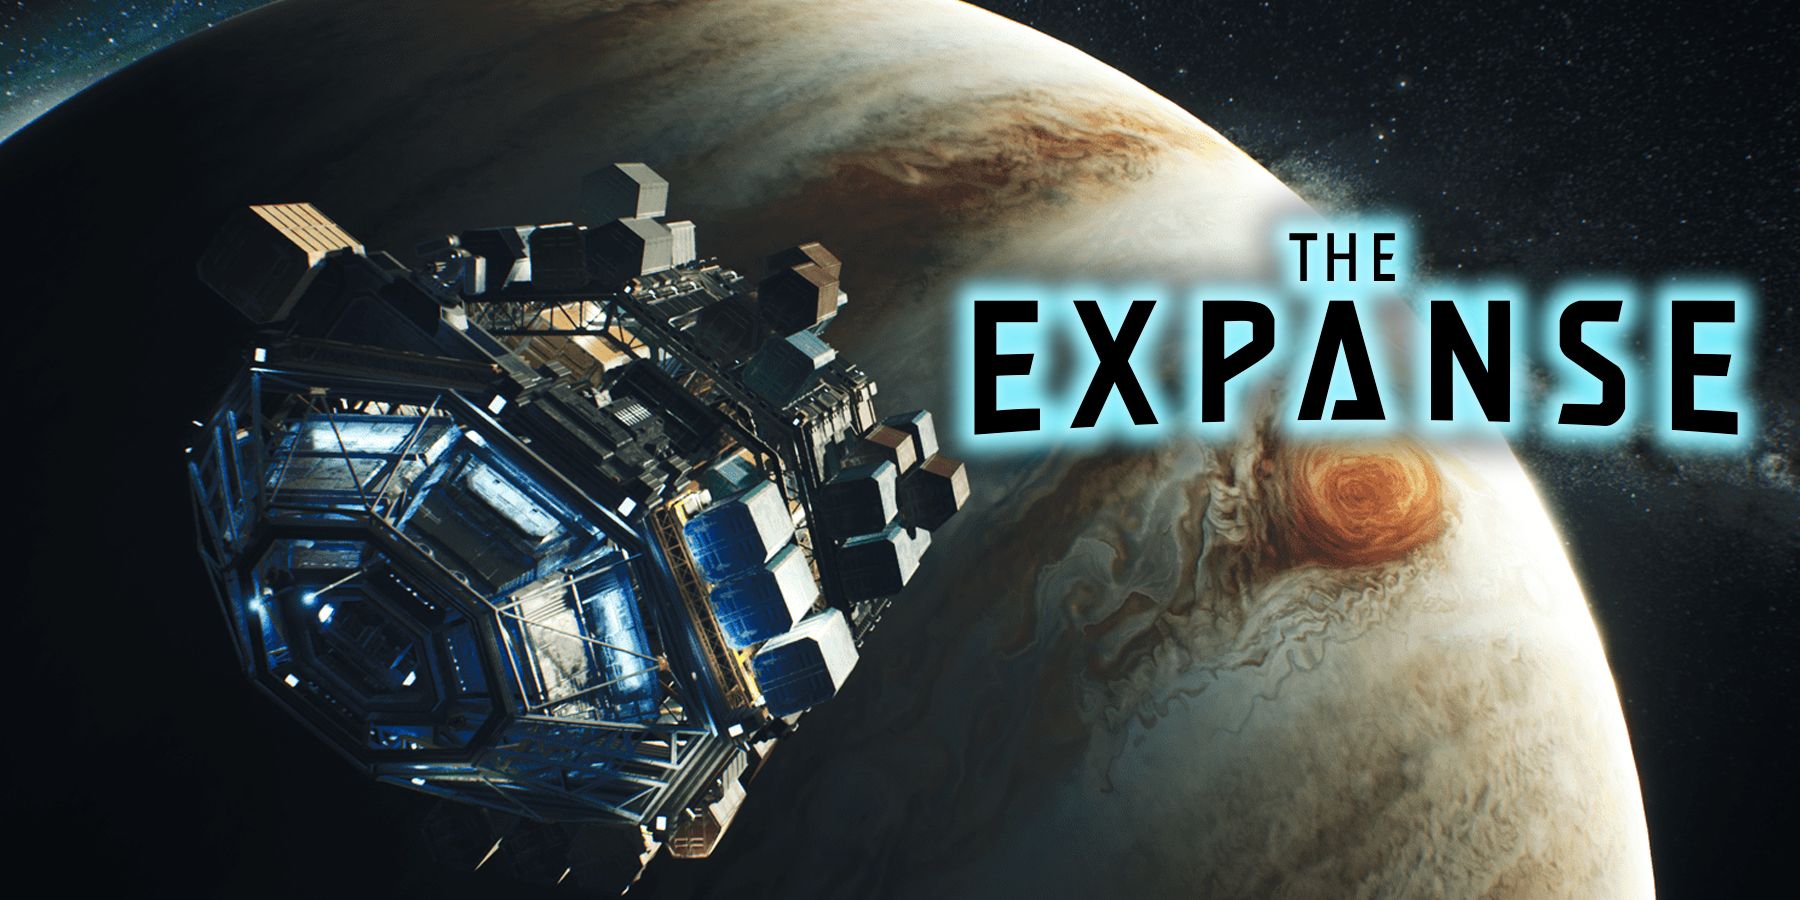 A spaceship from Telltale Games' upcoming game The Expanse: A Telltale Series.